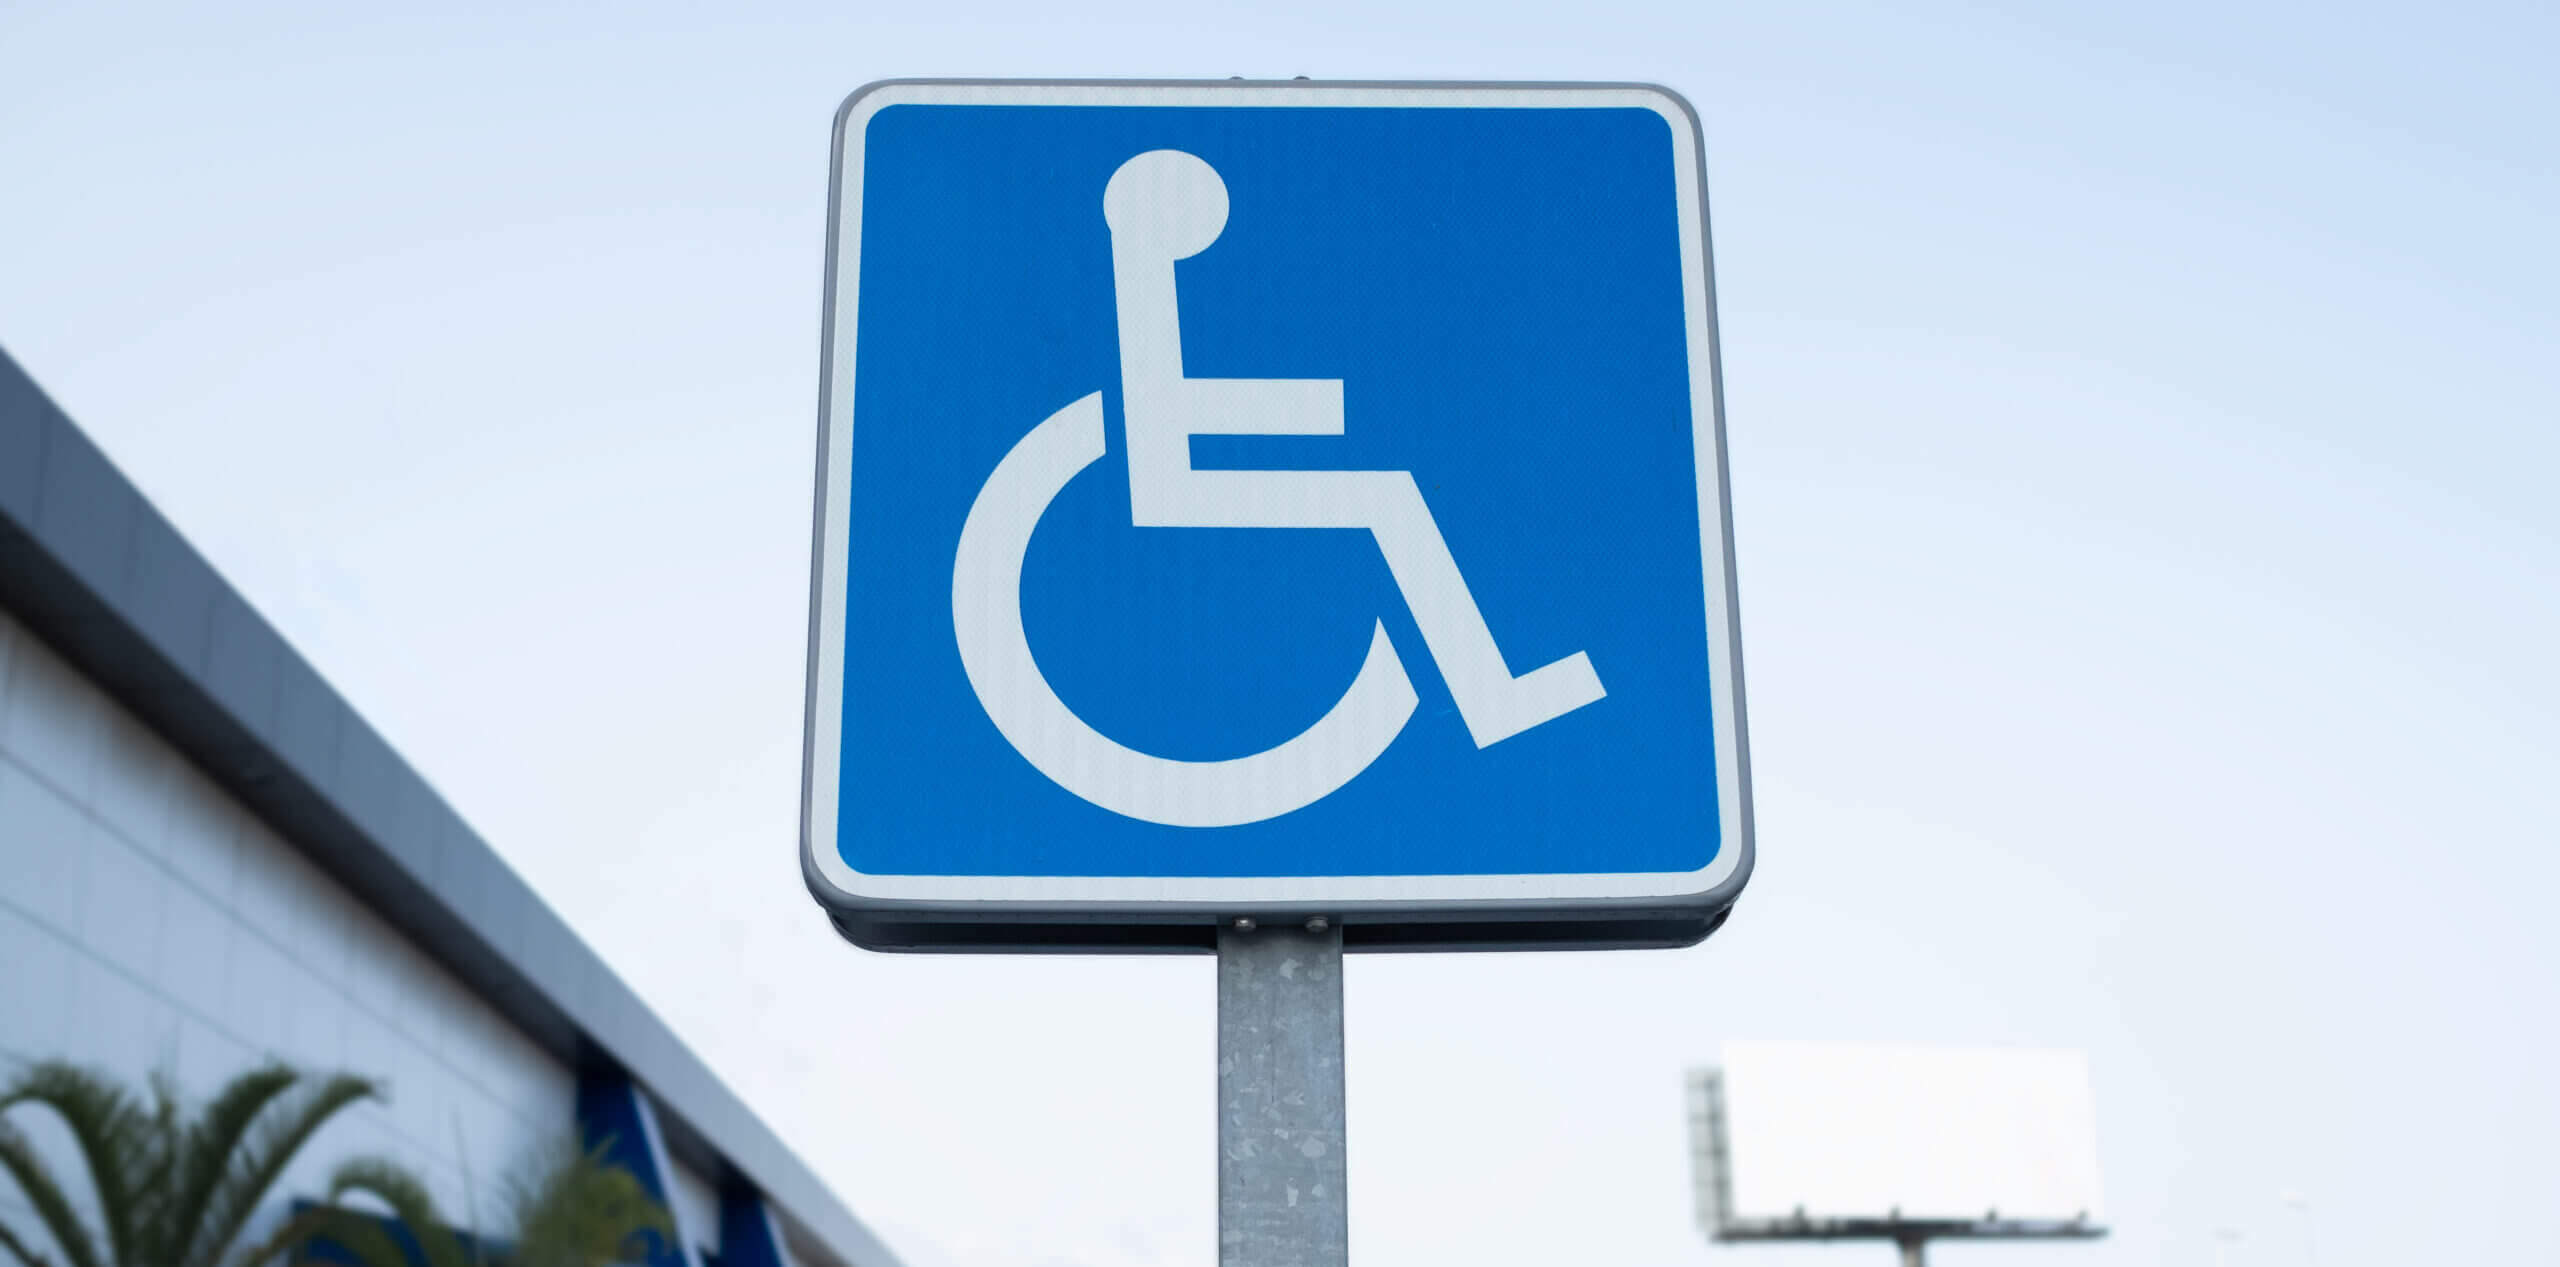 More People Choosing to 'Identify' as Handicapped